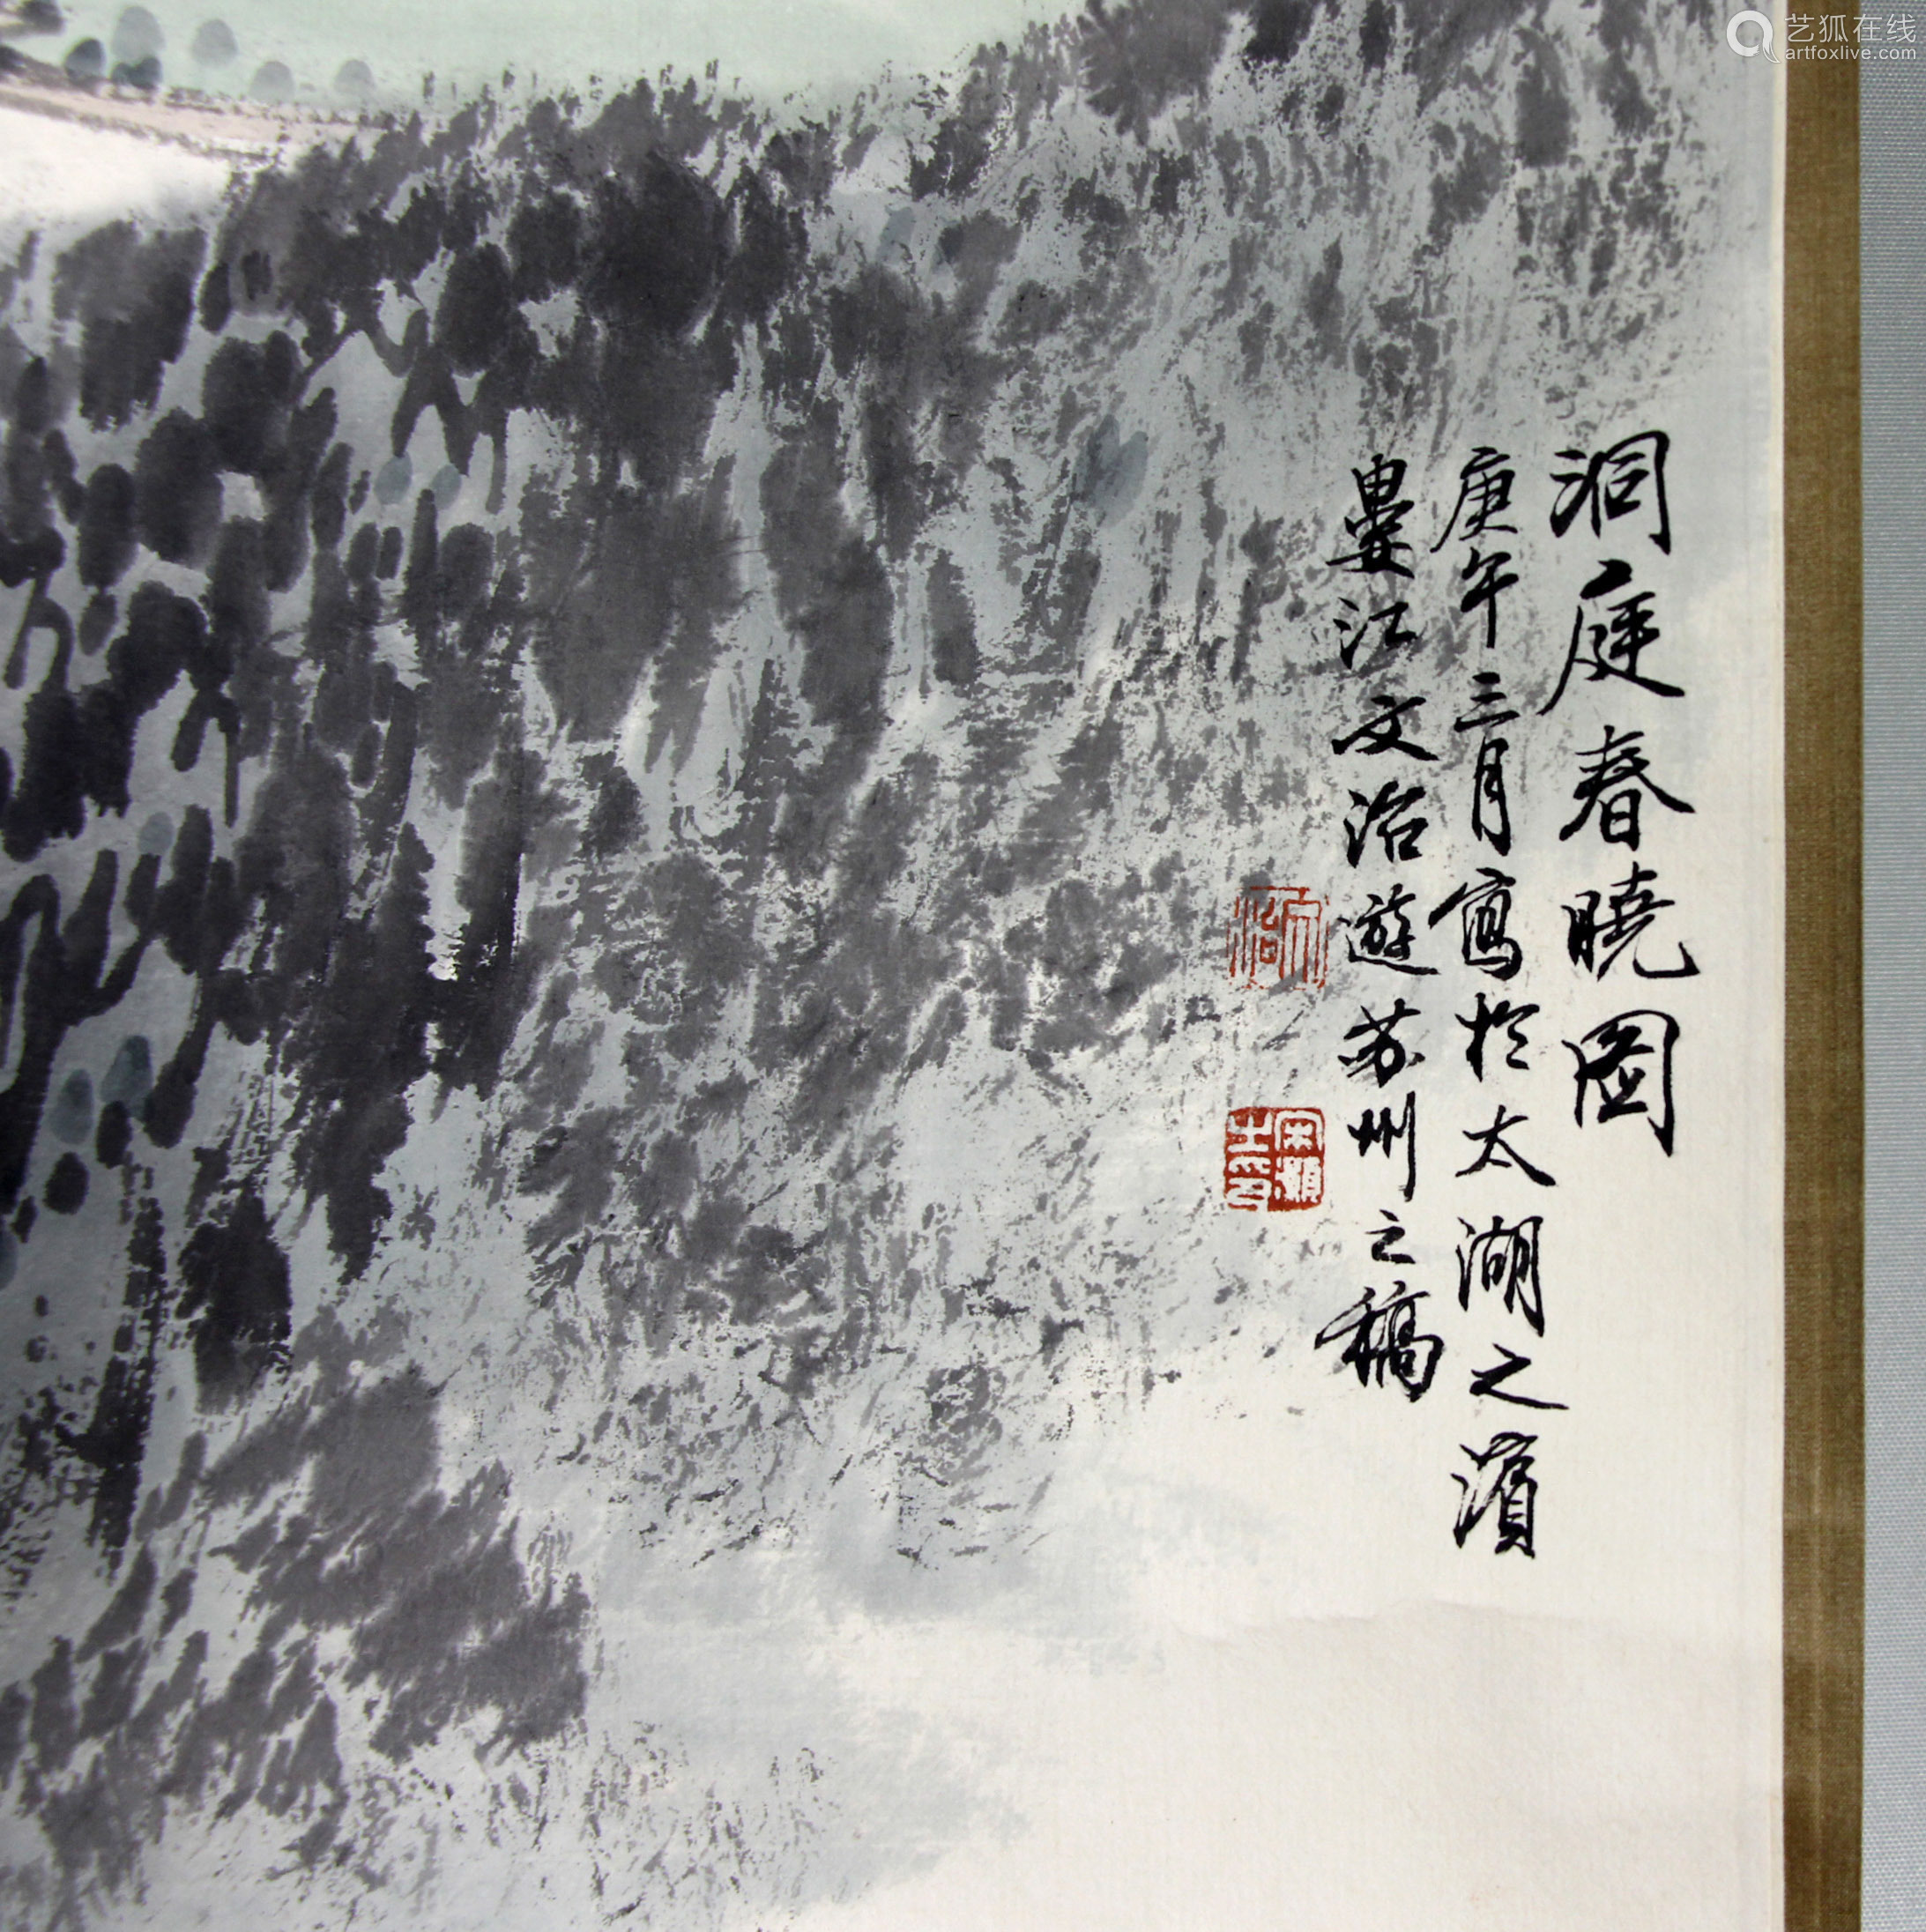 Chinese ink painting,
Song Wenzhi Landscape Painting